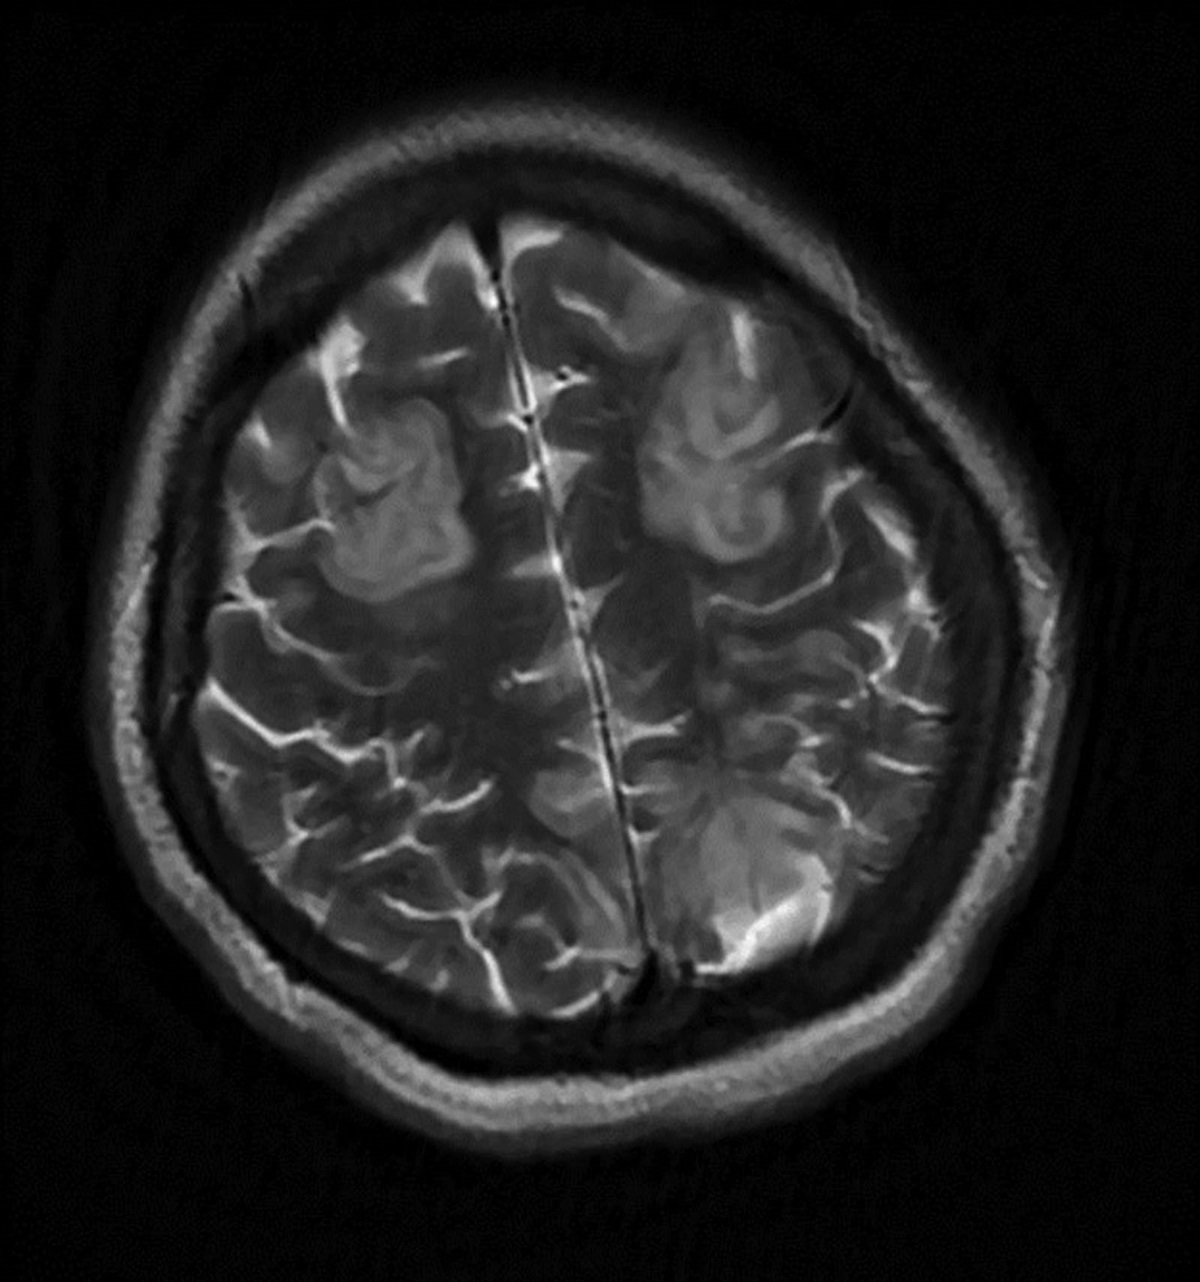 Posterior Reversible Encephalopathy Syndrome and Eclampsia in the Setting of Magnesium Toxicity: A Case Report